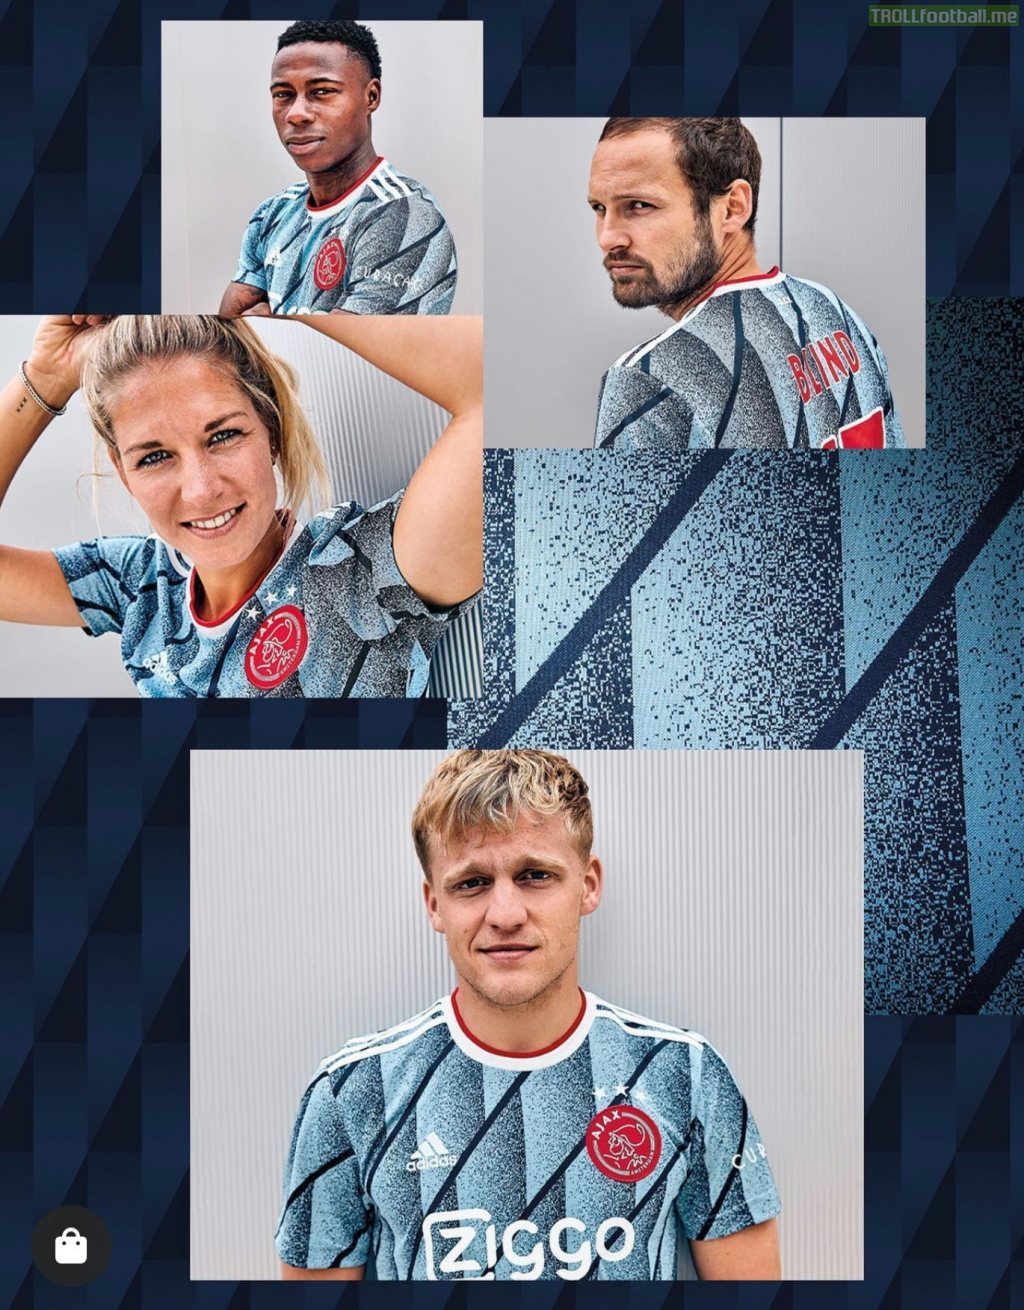 Ajax releases its away kit for 20/21